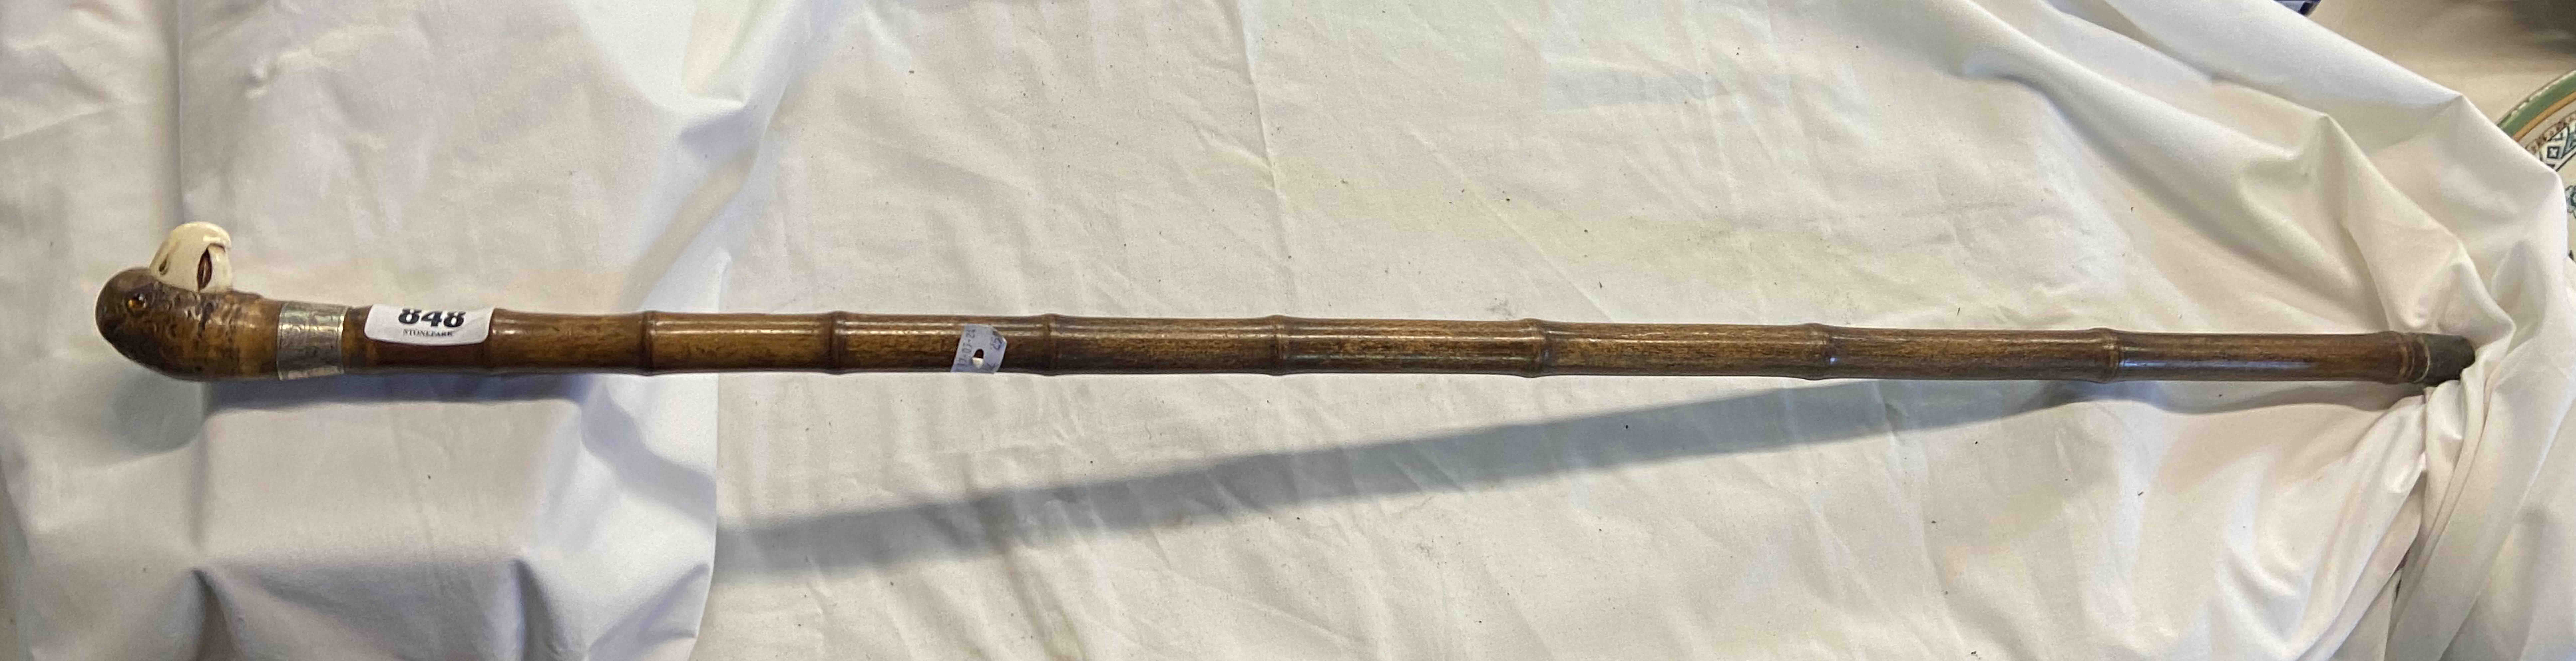 An antique bamboo walking stick with parrot handle, silver collar and ivory beak - CITES Reference